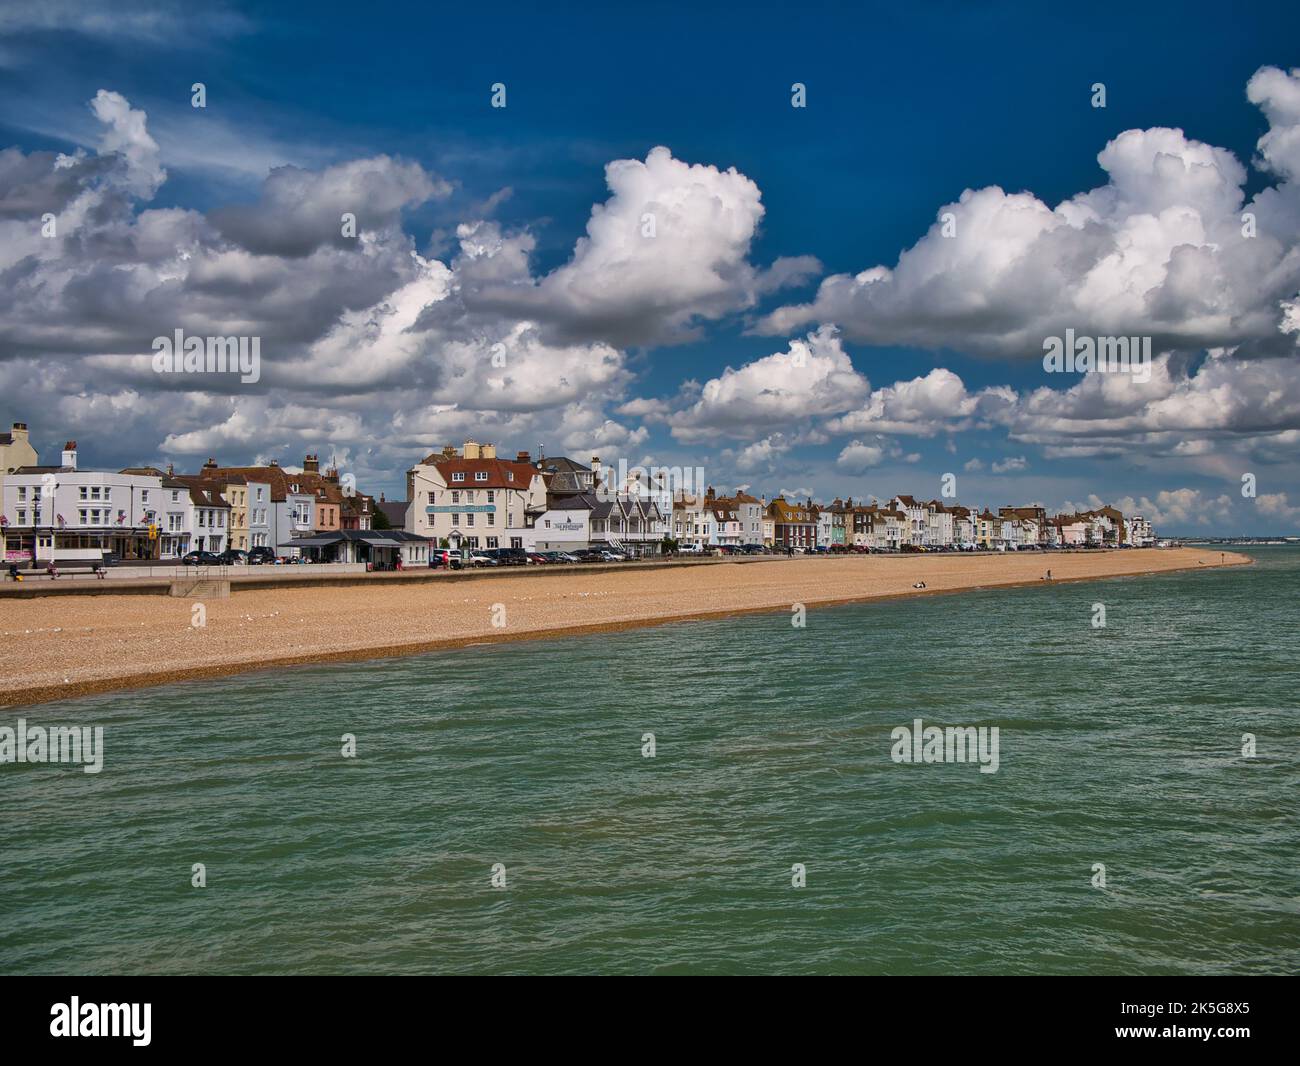 The pebble beach and seafront buildings at Deal, Kent, England, UK. Taken from the pier on a sunny day in summer with blue sky and white clouds. Stock Photo